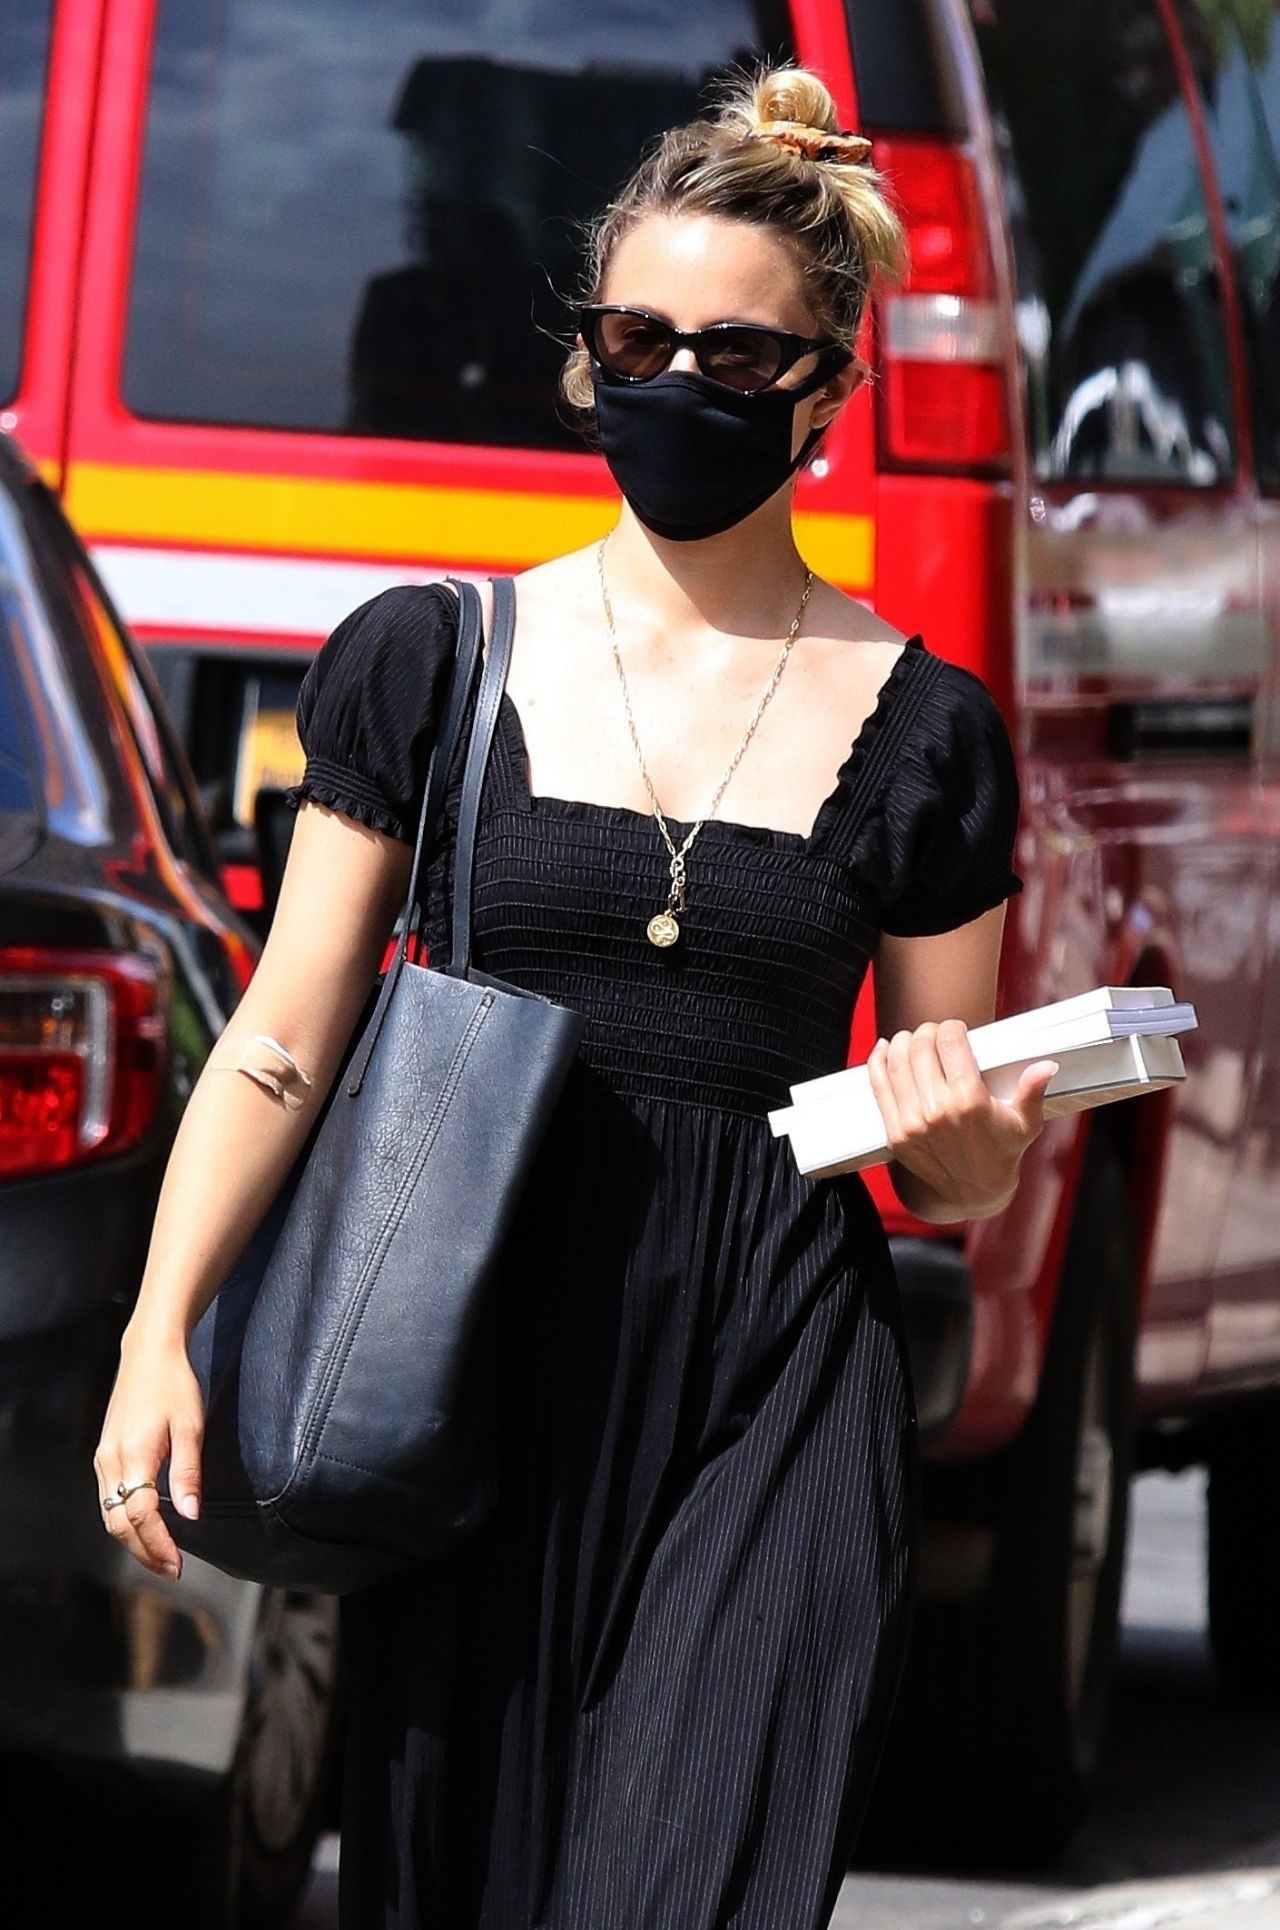 dianna-agron-out-in-nyc-08-26-2020-5.jpg